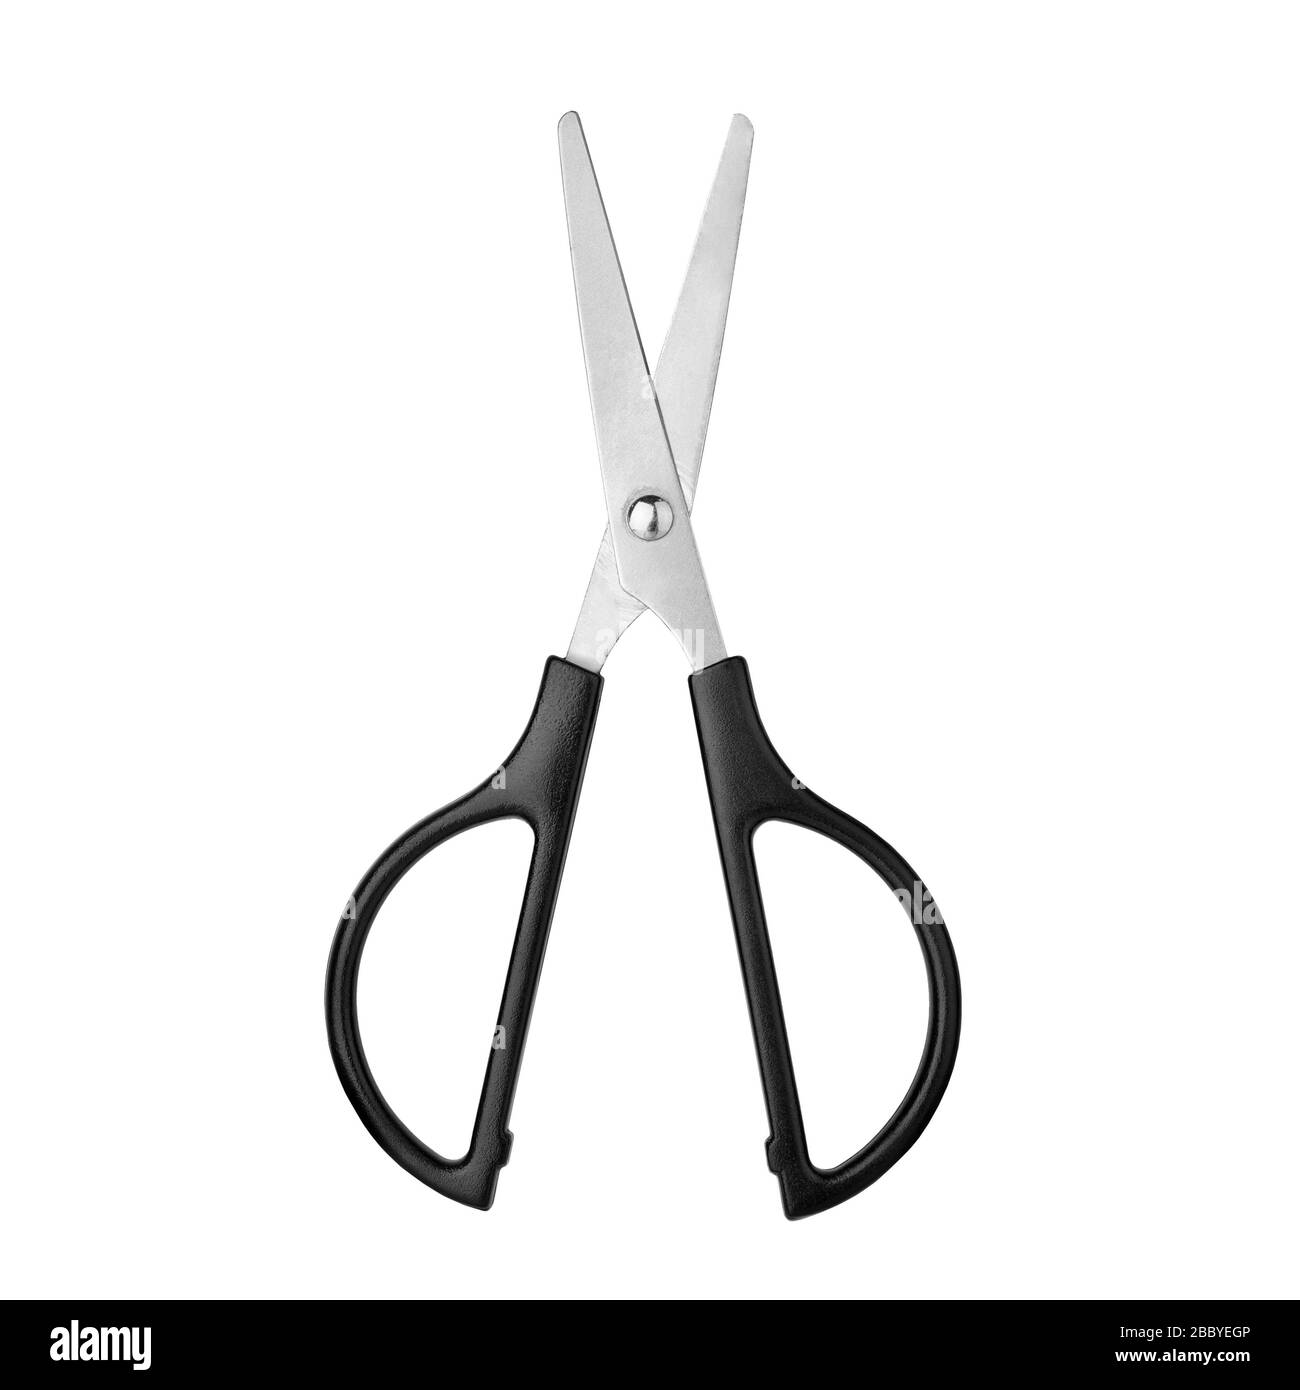 Silver metal open scissors with black plastic handles on white background isolated close up, steel cutting tool for paper, fabric clippers, shears Stock Photo